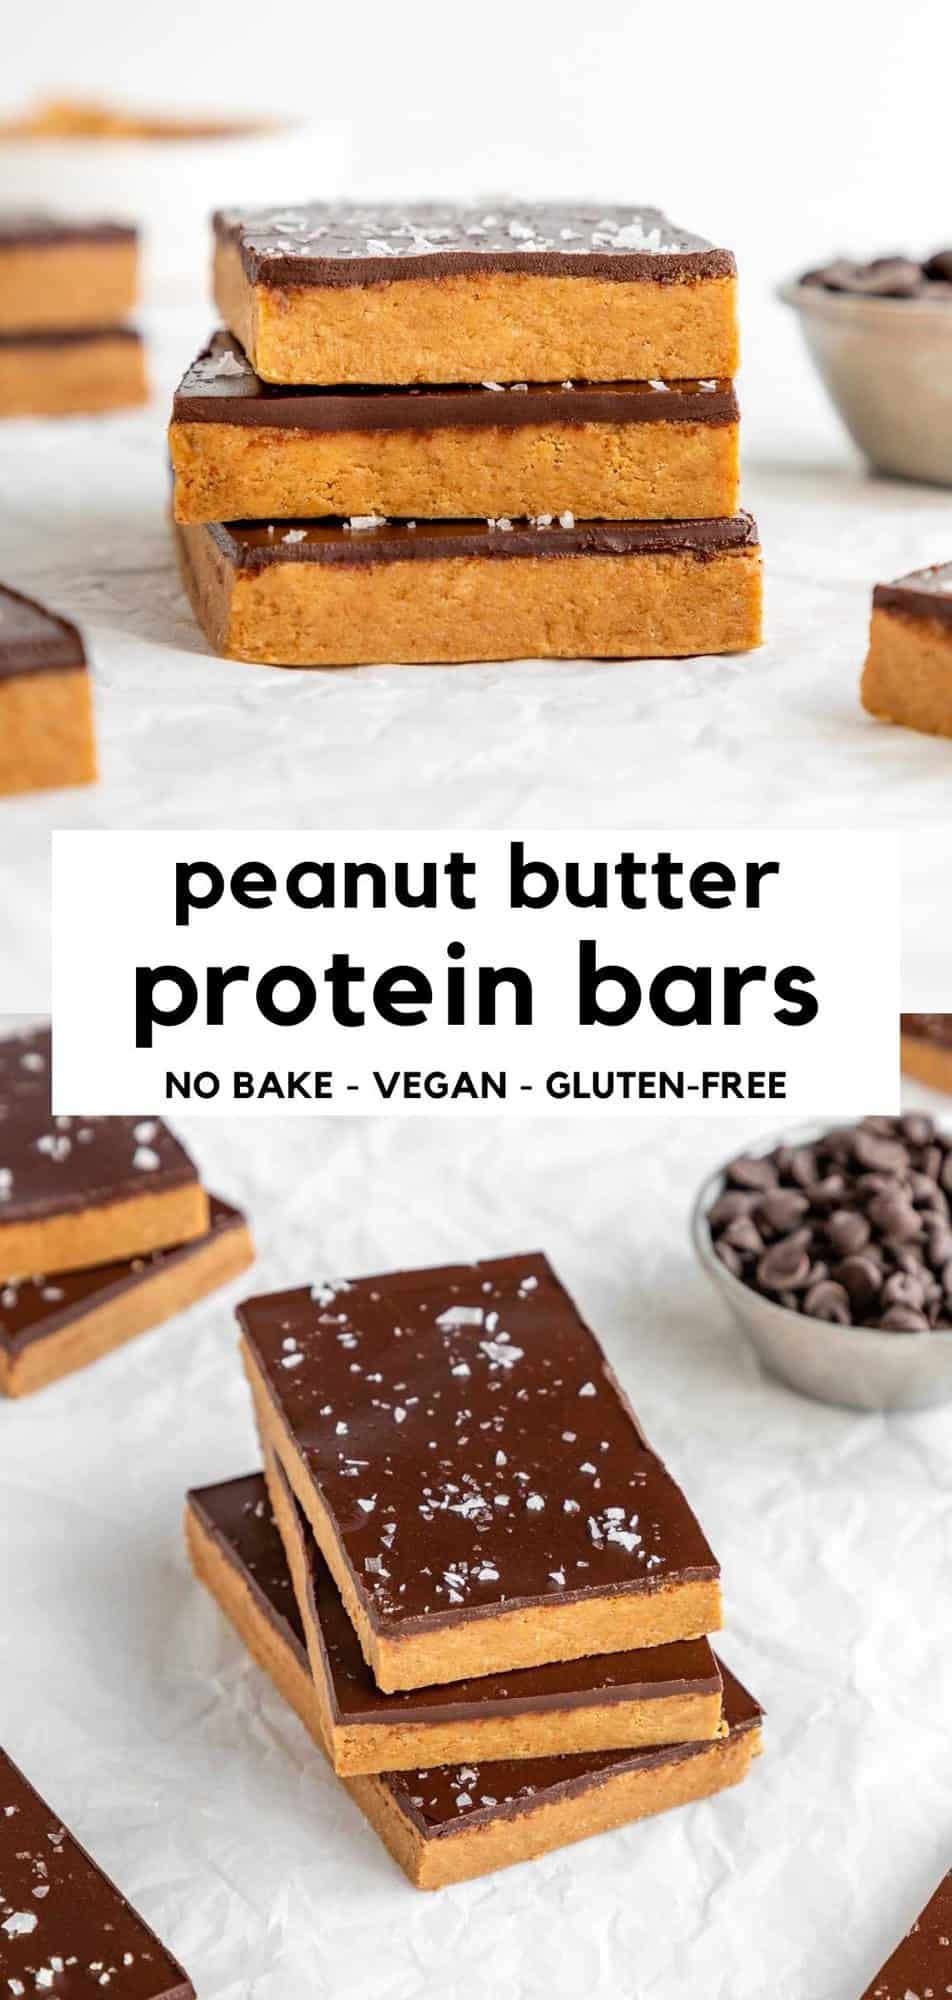 No Bake Chocolate Peanut Butter Protein Bars - Purely Kaylie